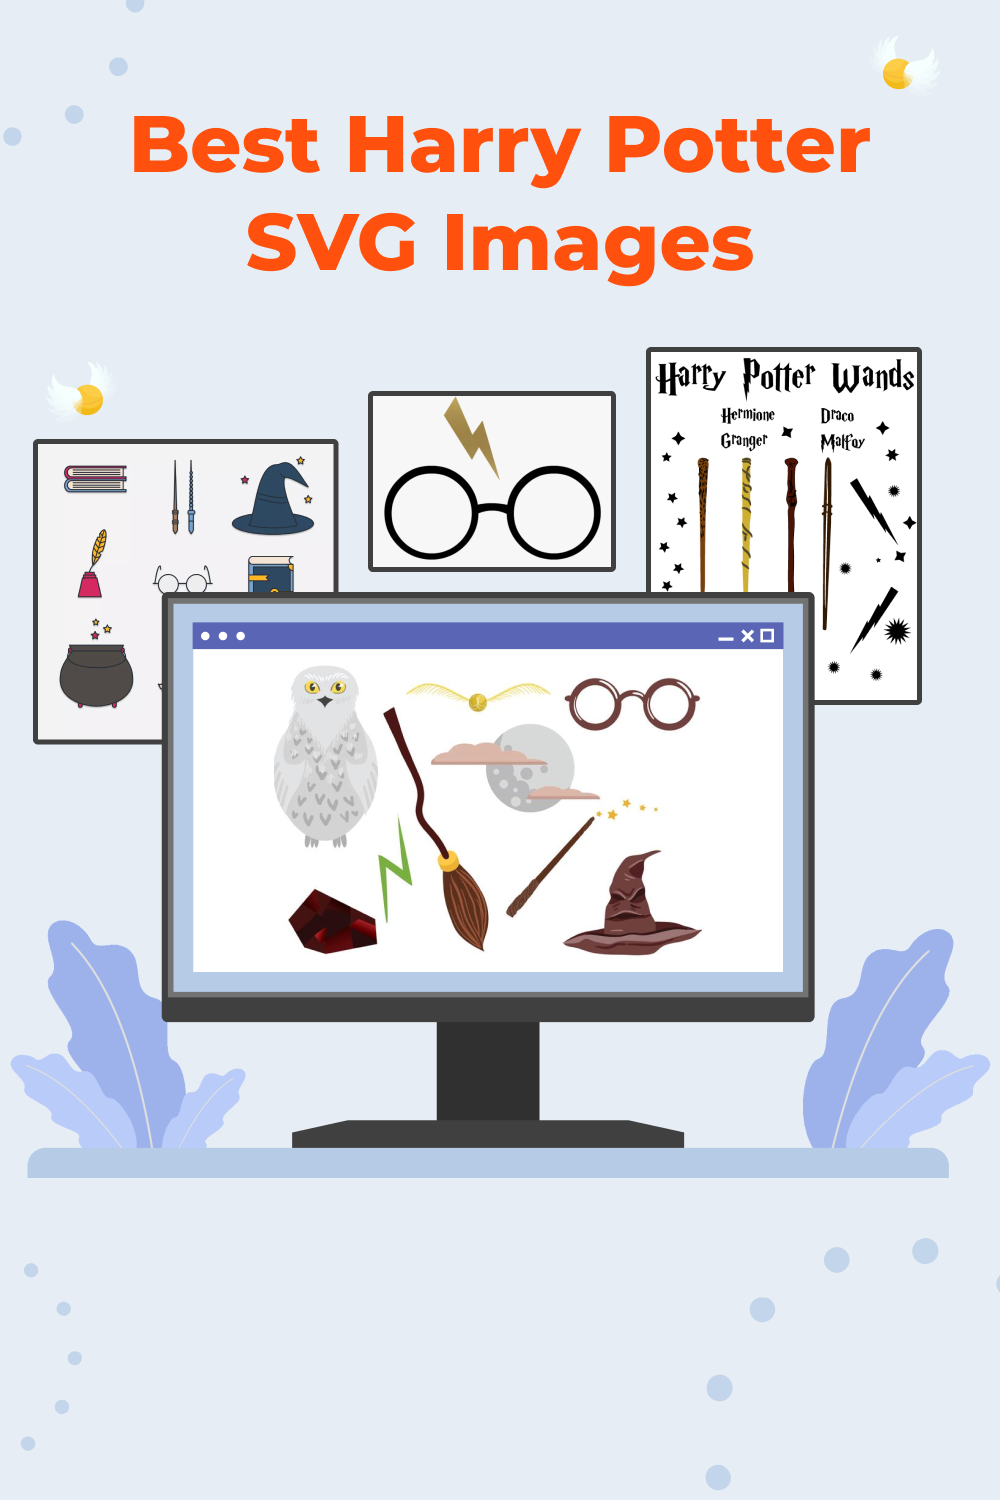 best harry potter svg images in 2021 free and premium pinterest.